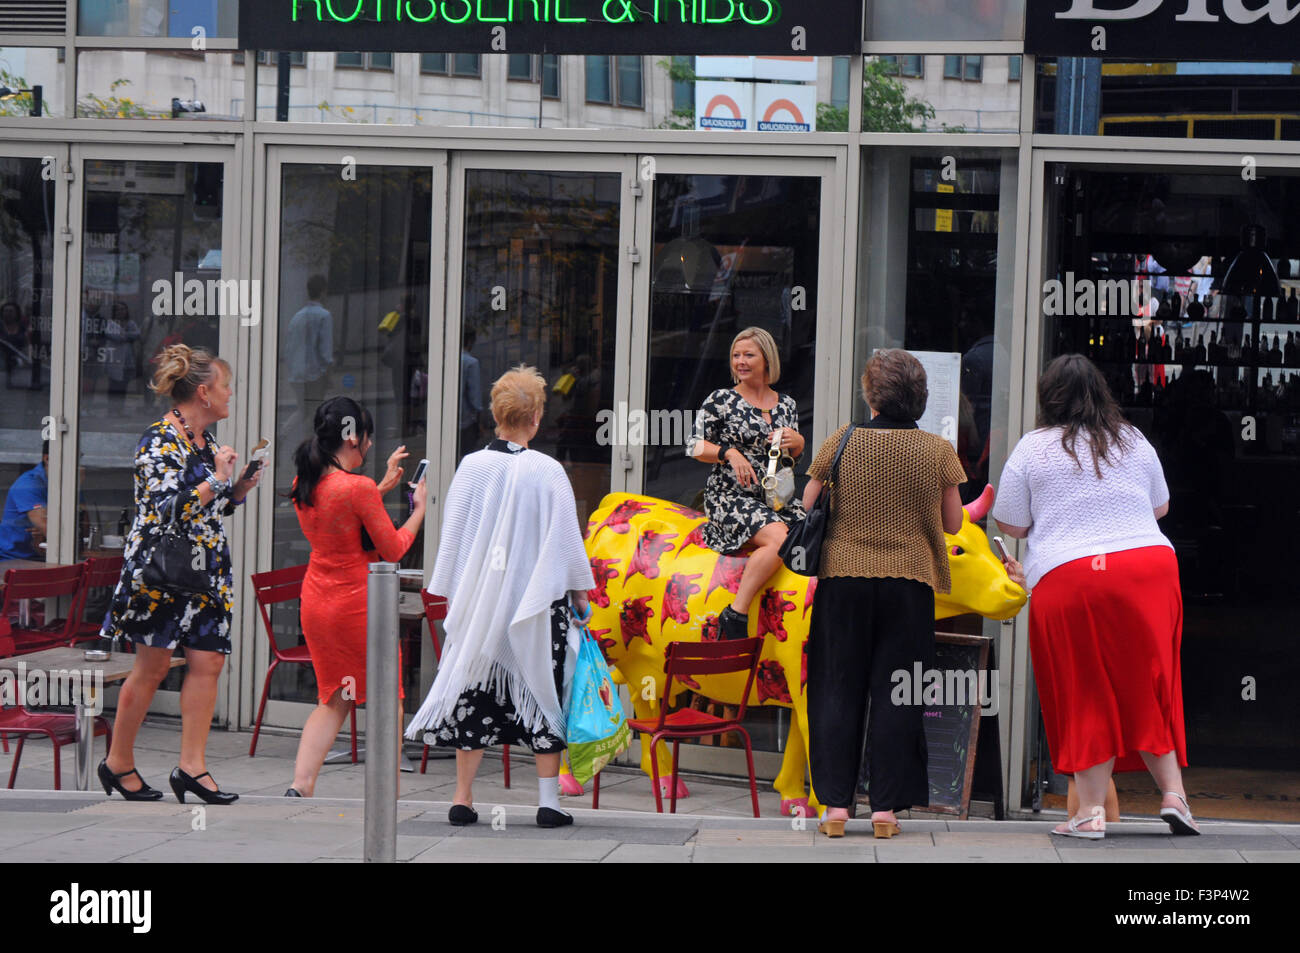 London, UK, 21 September 2014, Girls day out, high spirited one climbs on cow at restaurant on their way to Waterloo station. Stock Photo